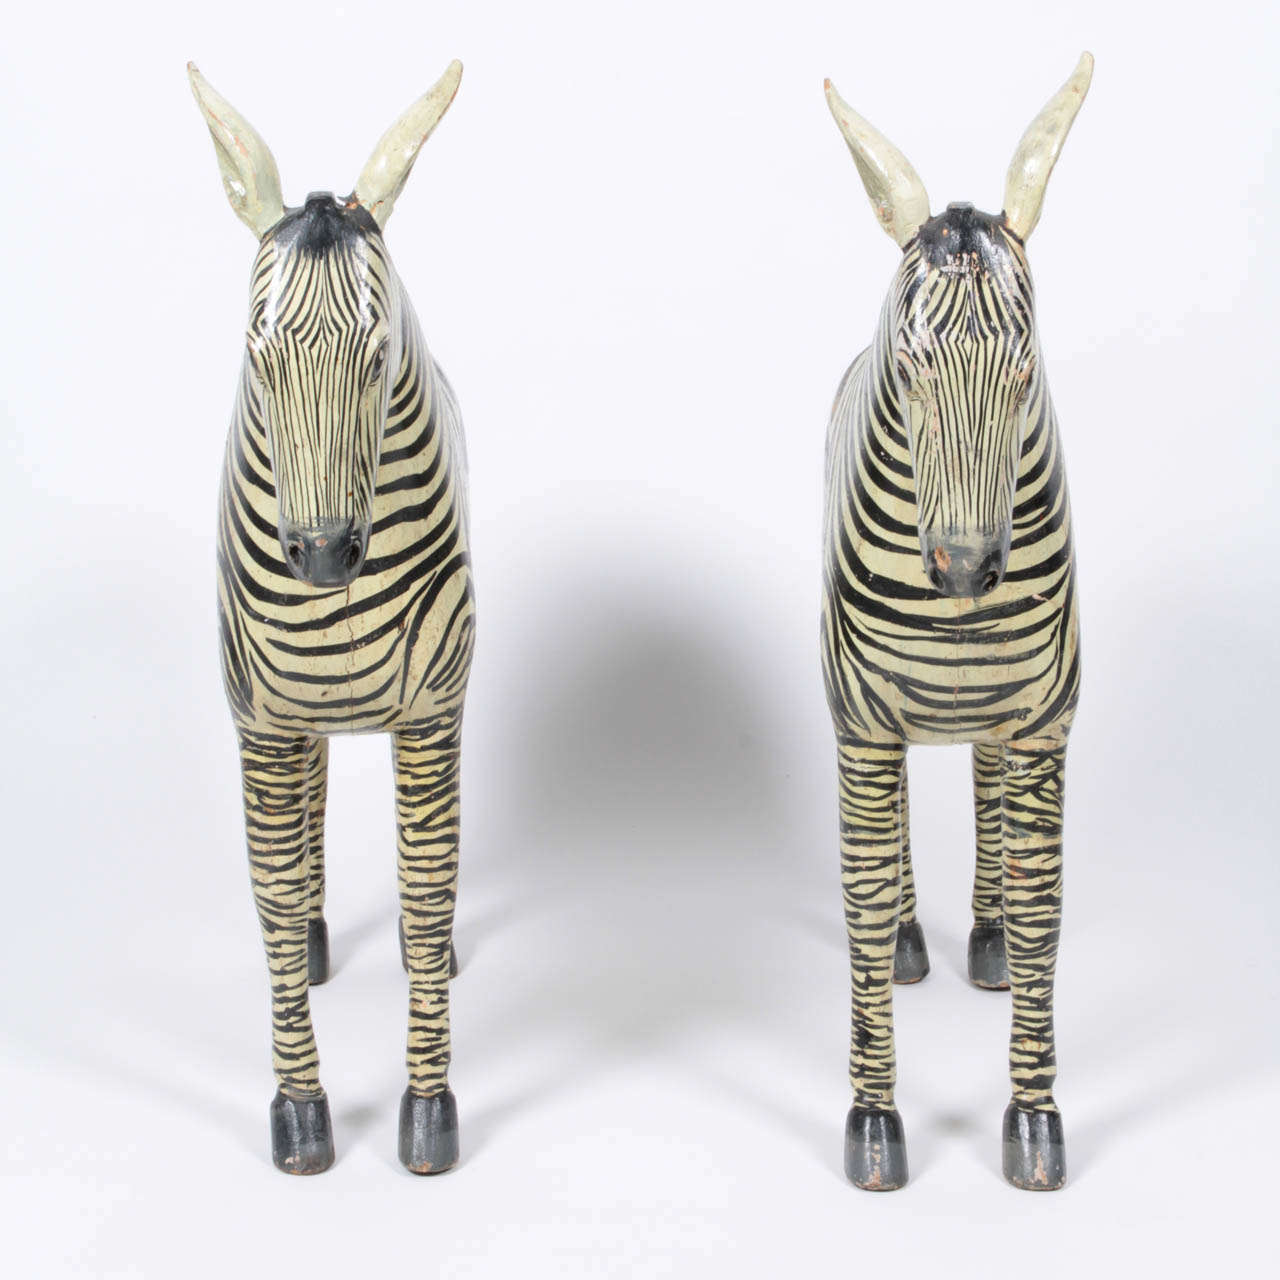 A very nice pair of carved wood and painted Zebras, Circa 1900 - 1910, possibly Burmese. Original paint.